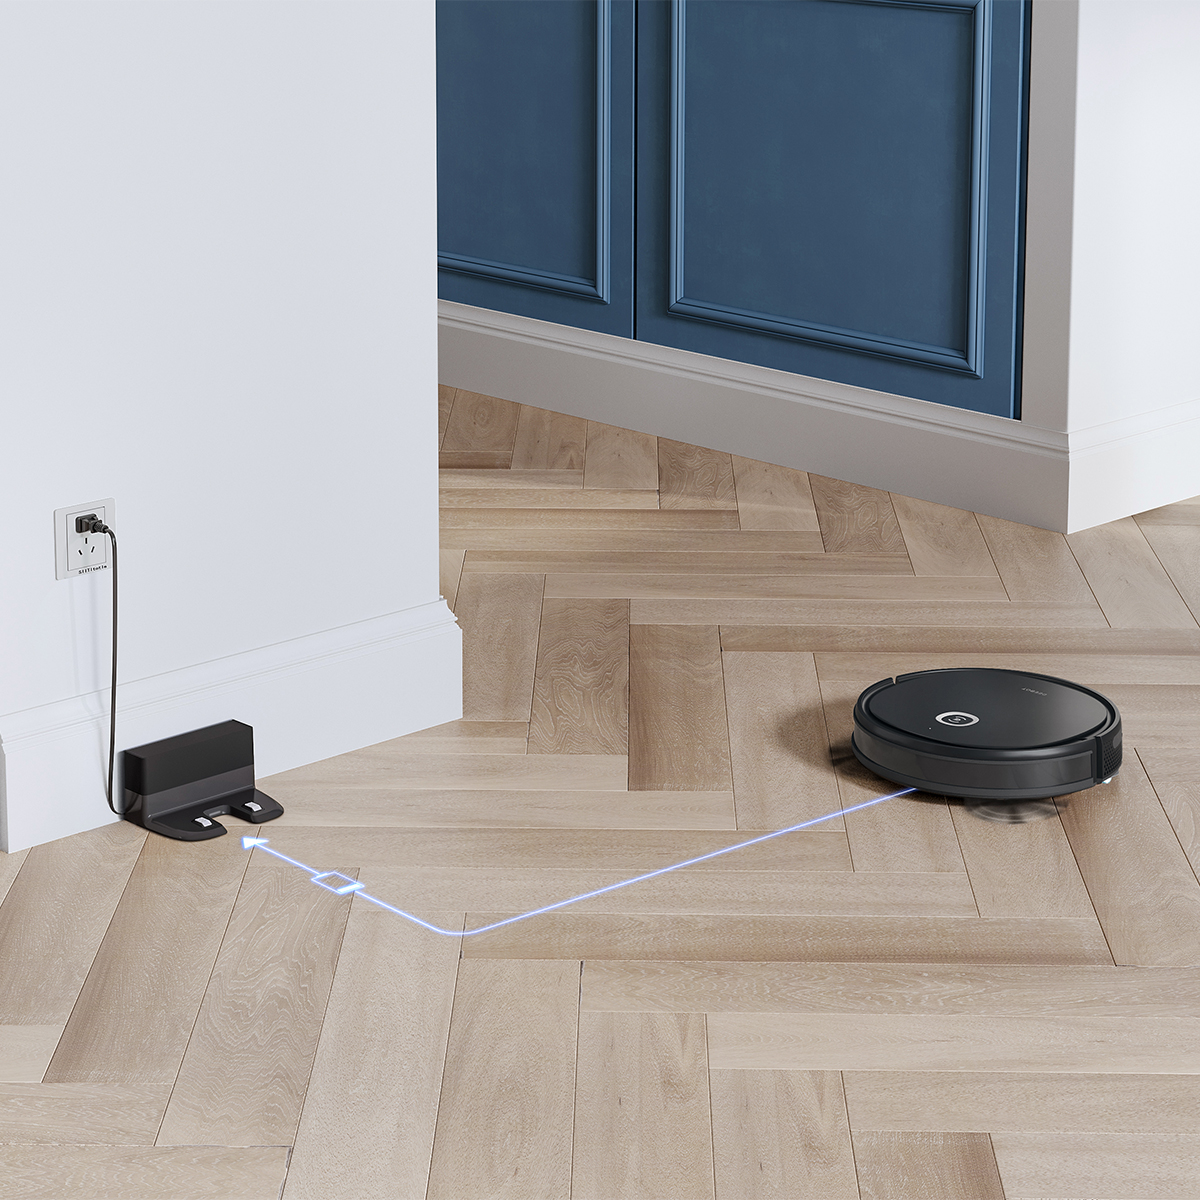 ECOVACS DEEBOT U2 2-in-1 Robot Vacuum Cleaner and Mop with WiFi & App in Black - image 3 of 7